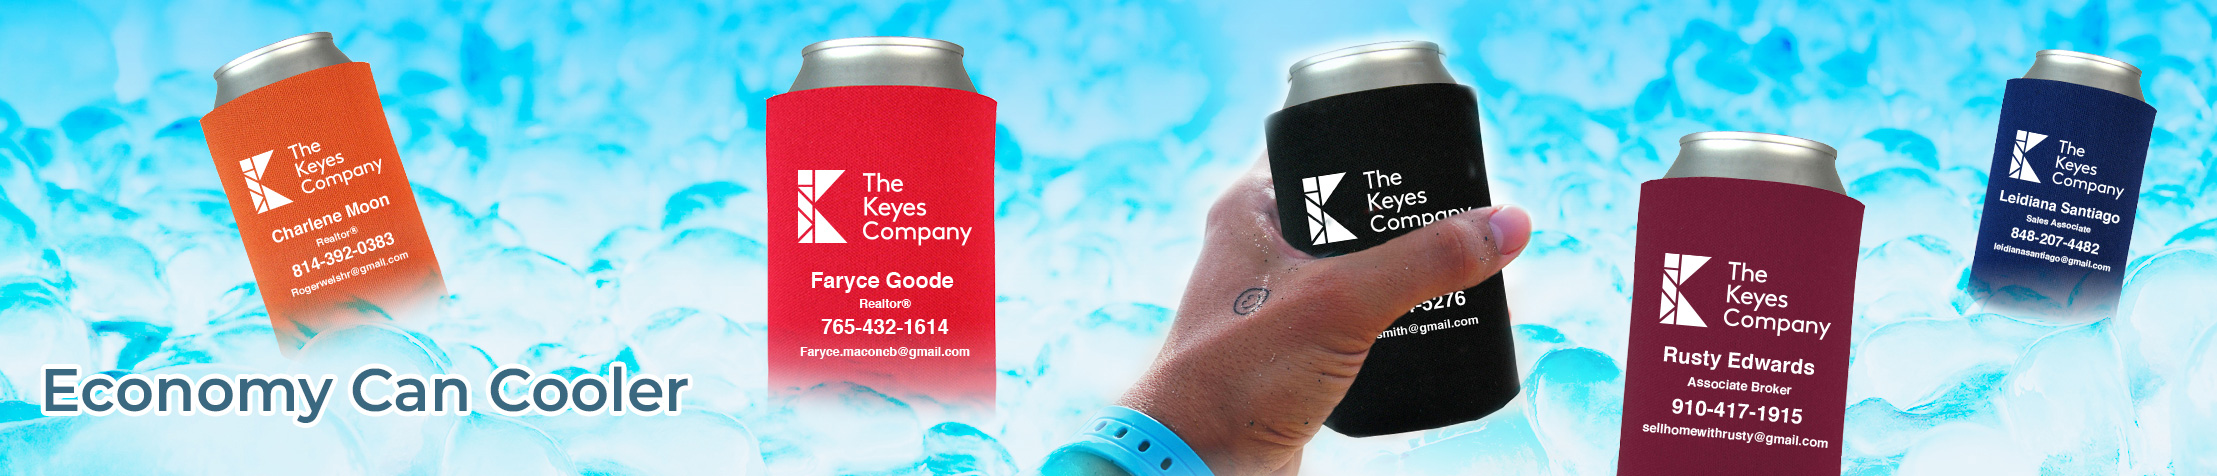 The Keyes Company Real Estate Economy Can Cooler - The Keyes Company  personalized realtor promotional products | BestPrintBuy.com